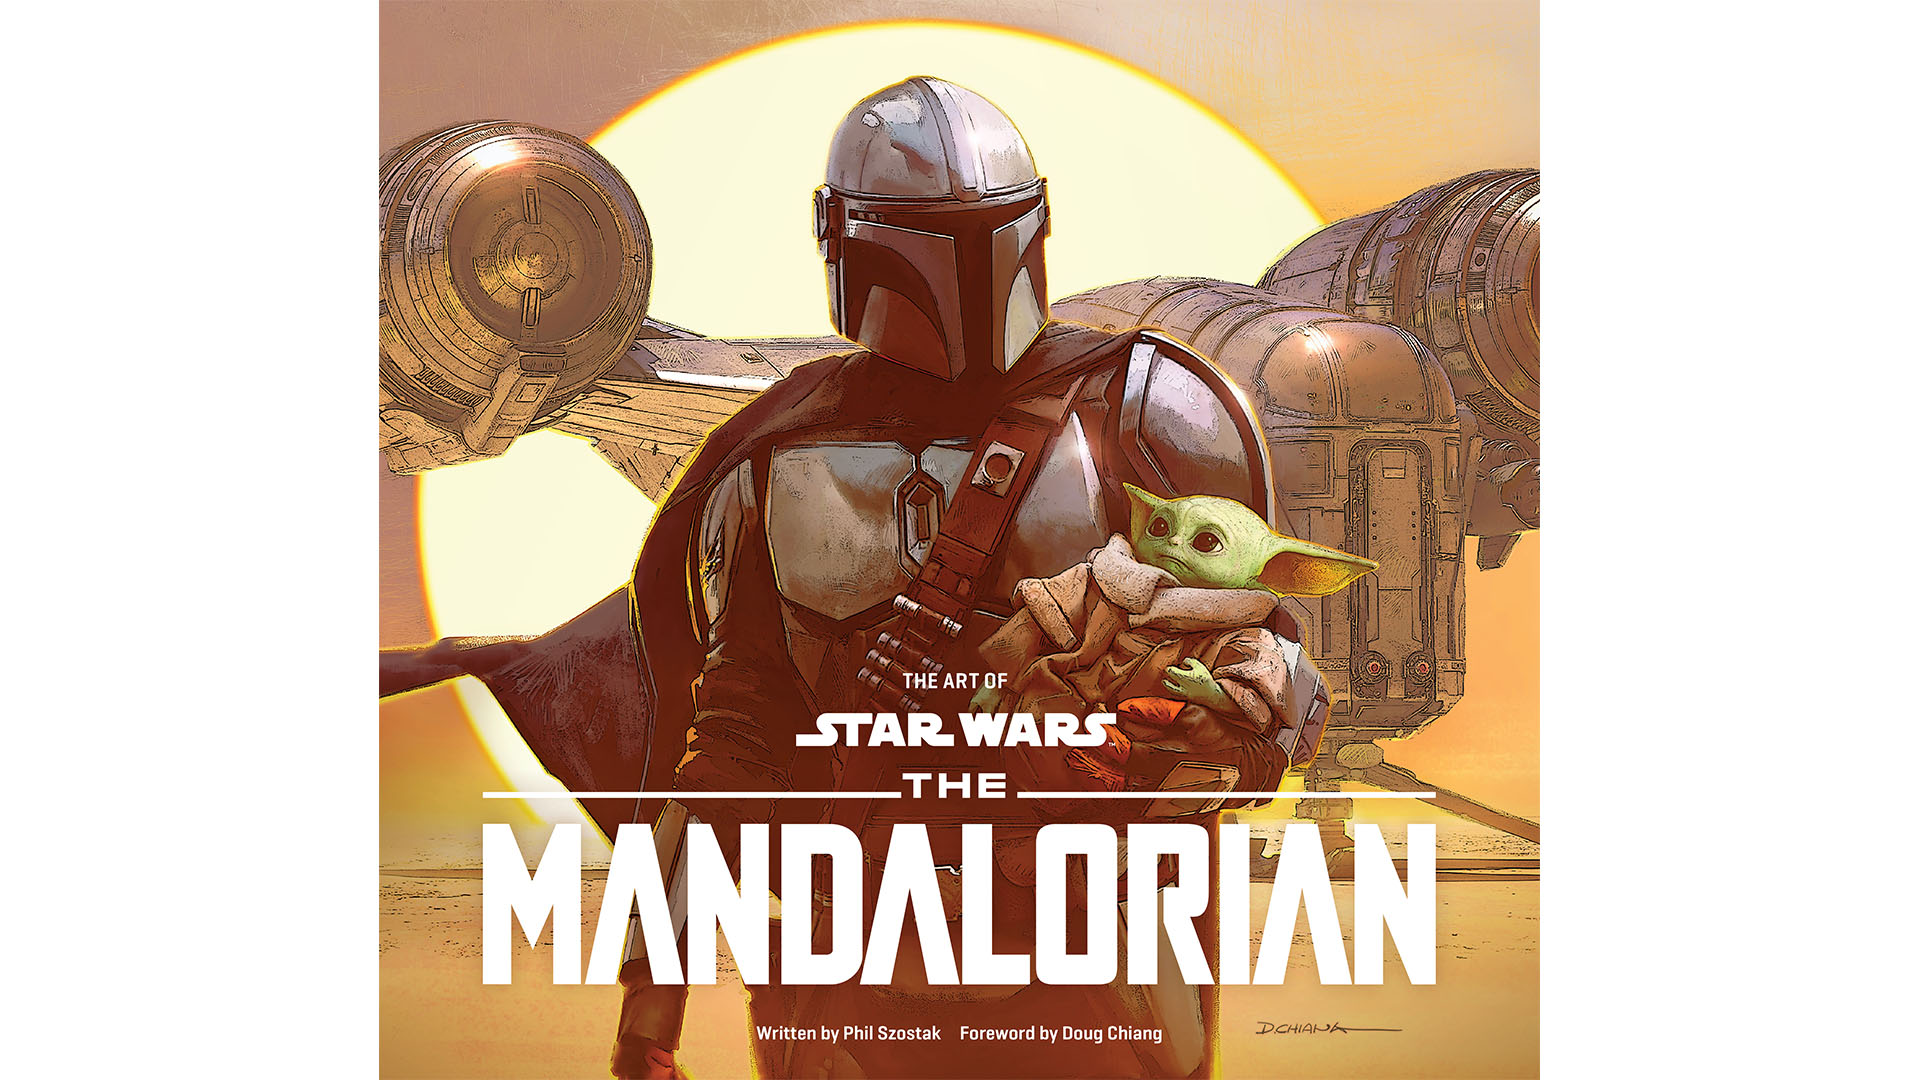 The cover of The Art of Star Wars: The Mandalorian (Season One), written by Phil Szostak.